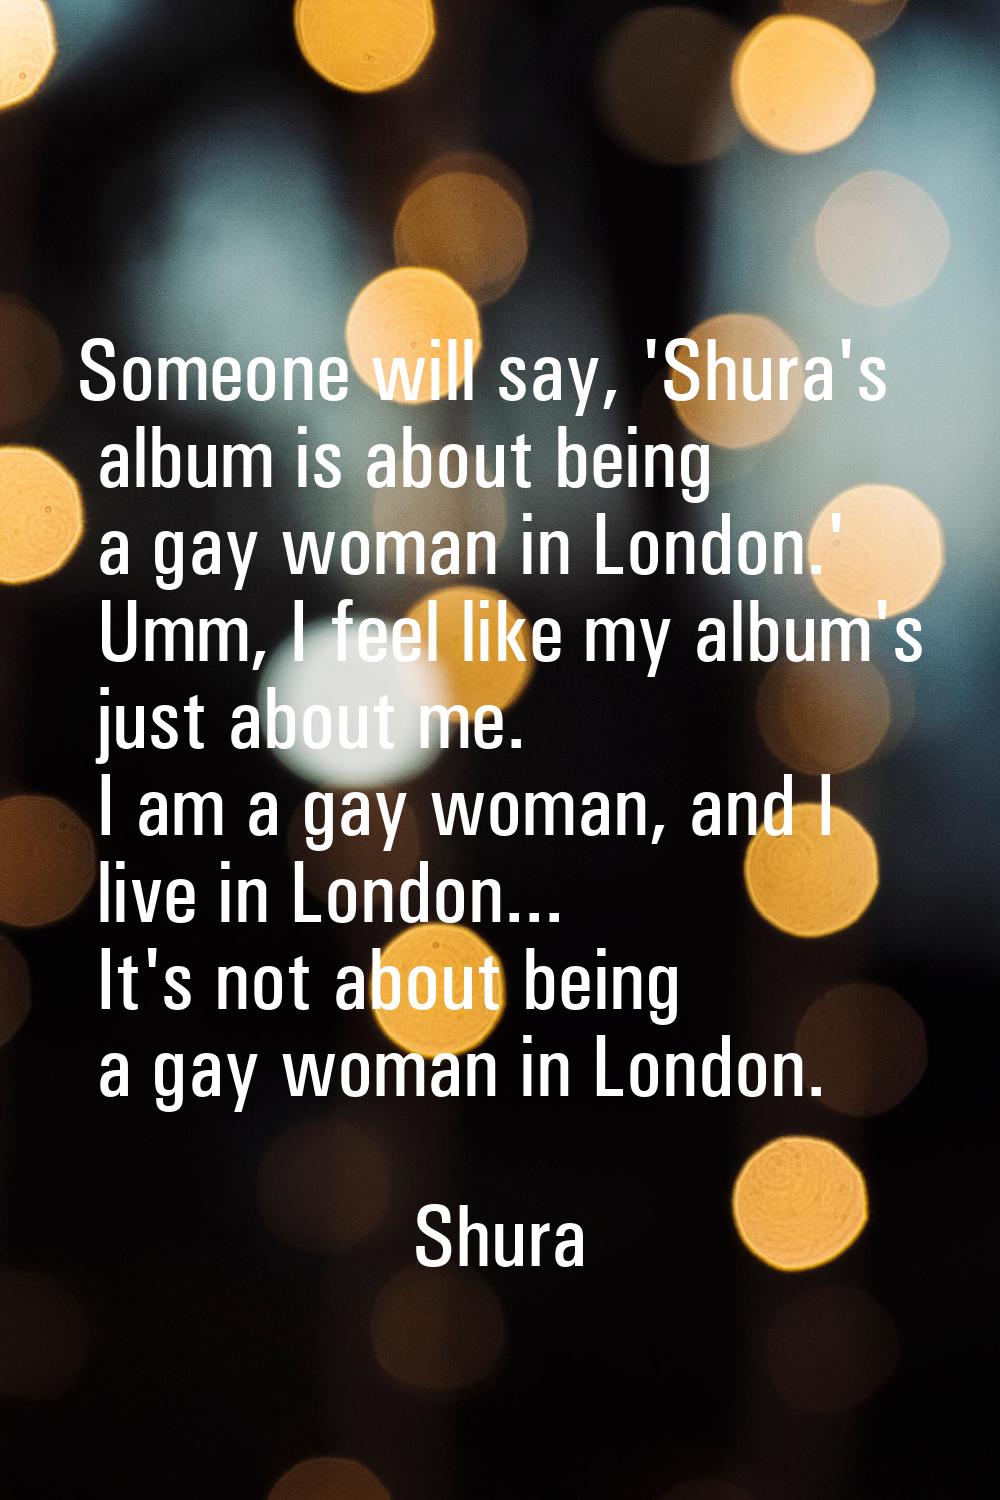 Someone will say, 'Shura's album is about being a gay woman in London.' Umm, I feel like my album's